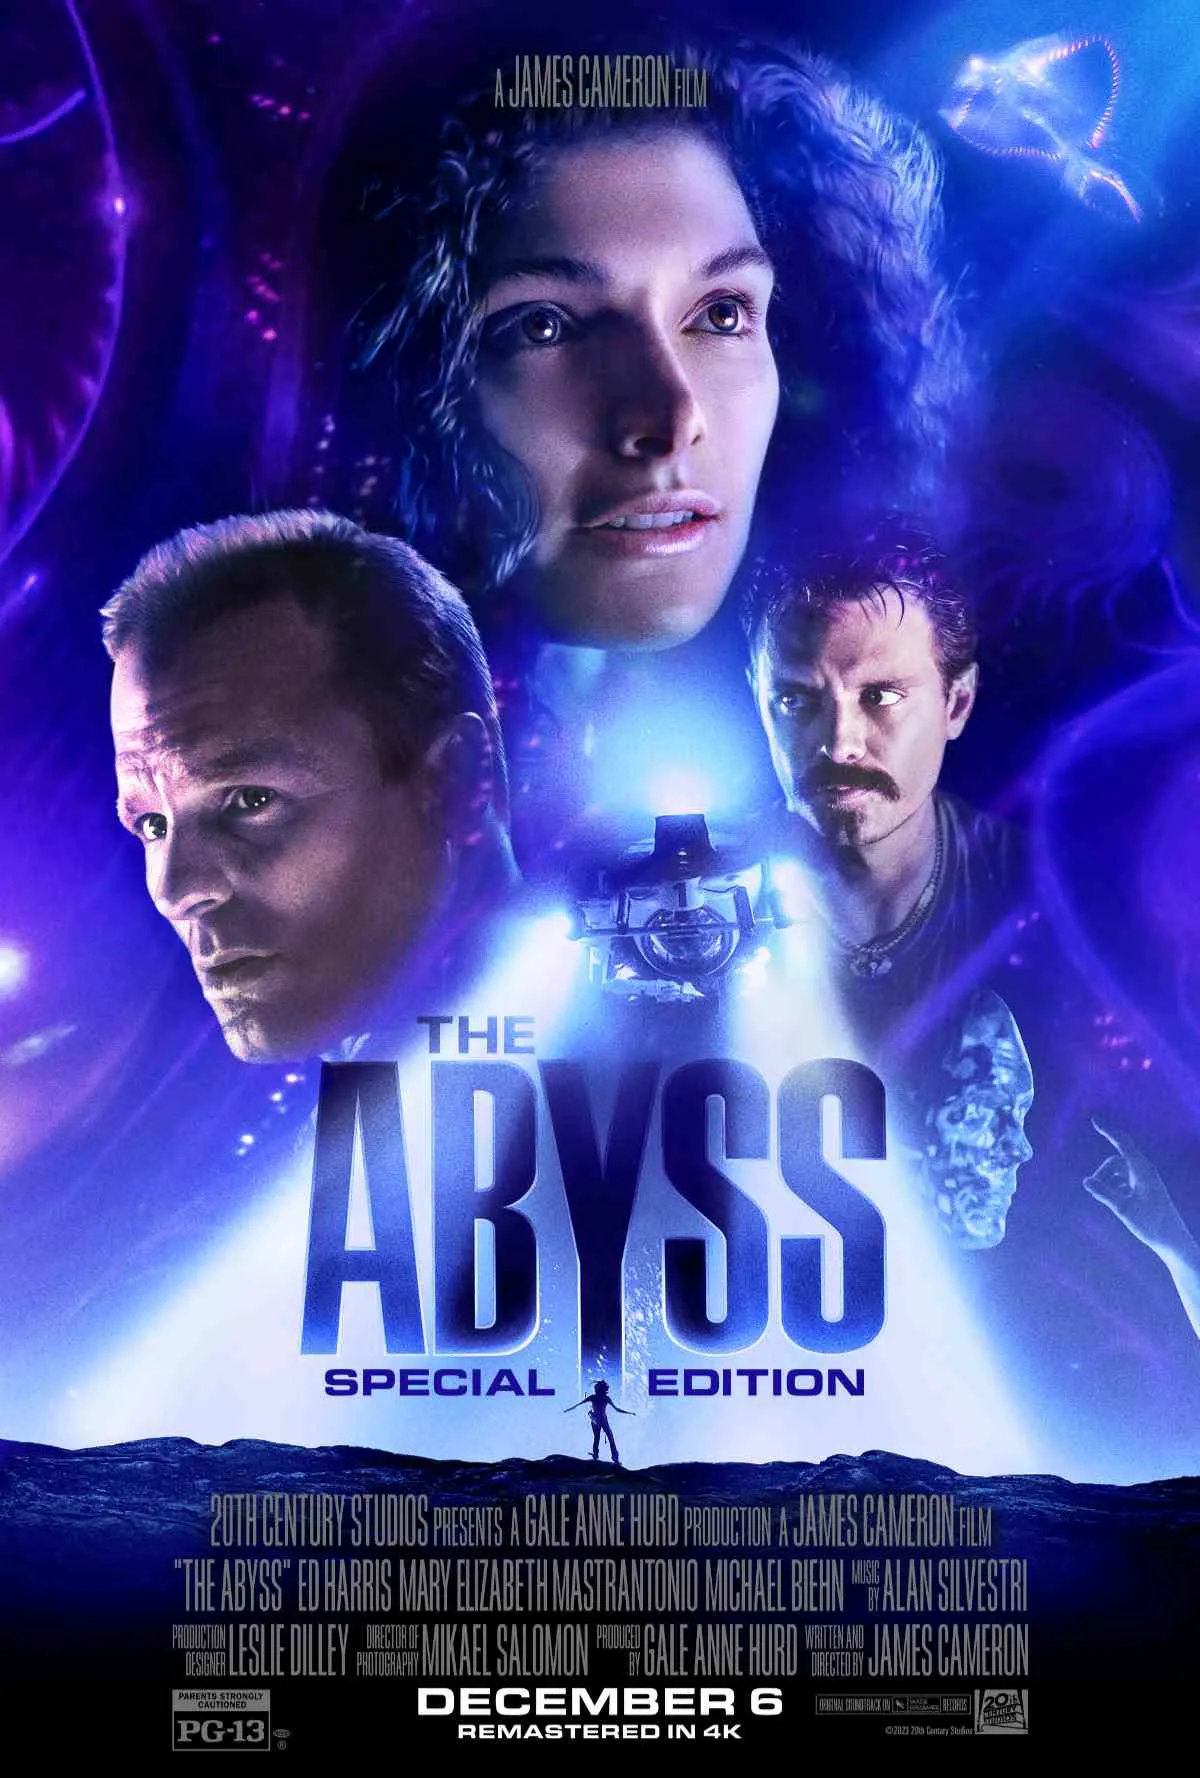 The Abyss: Special Edition